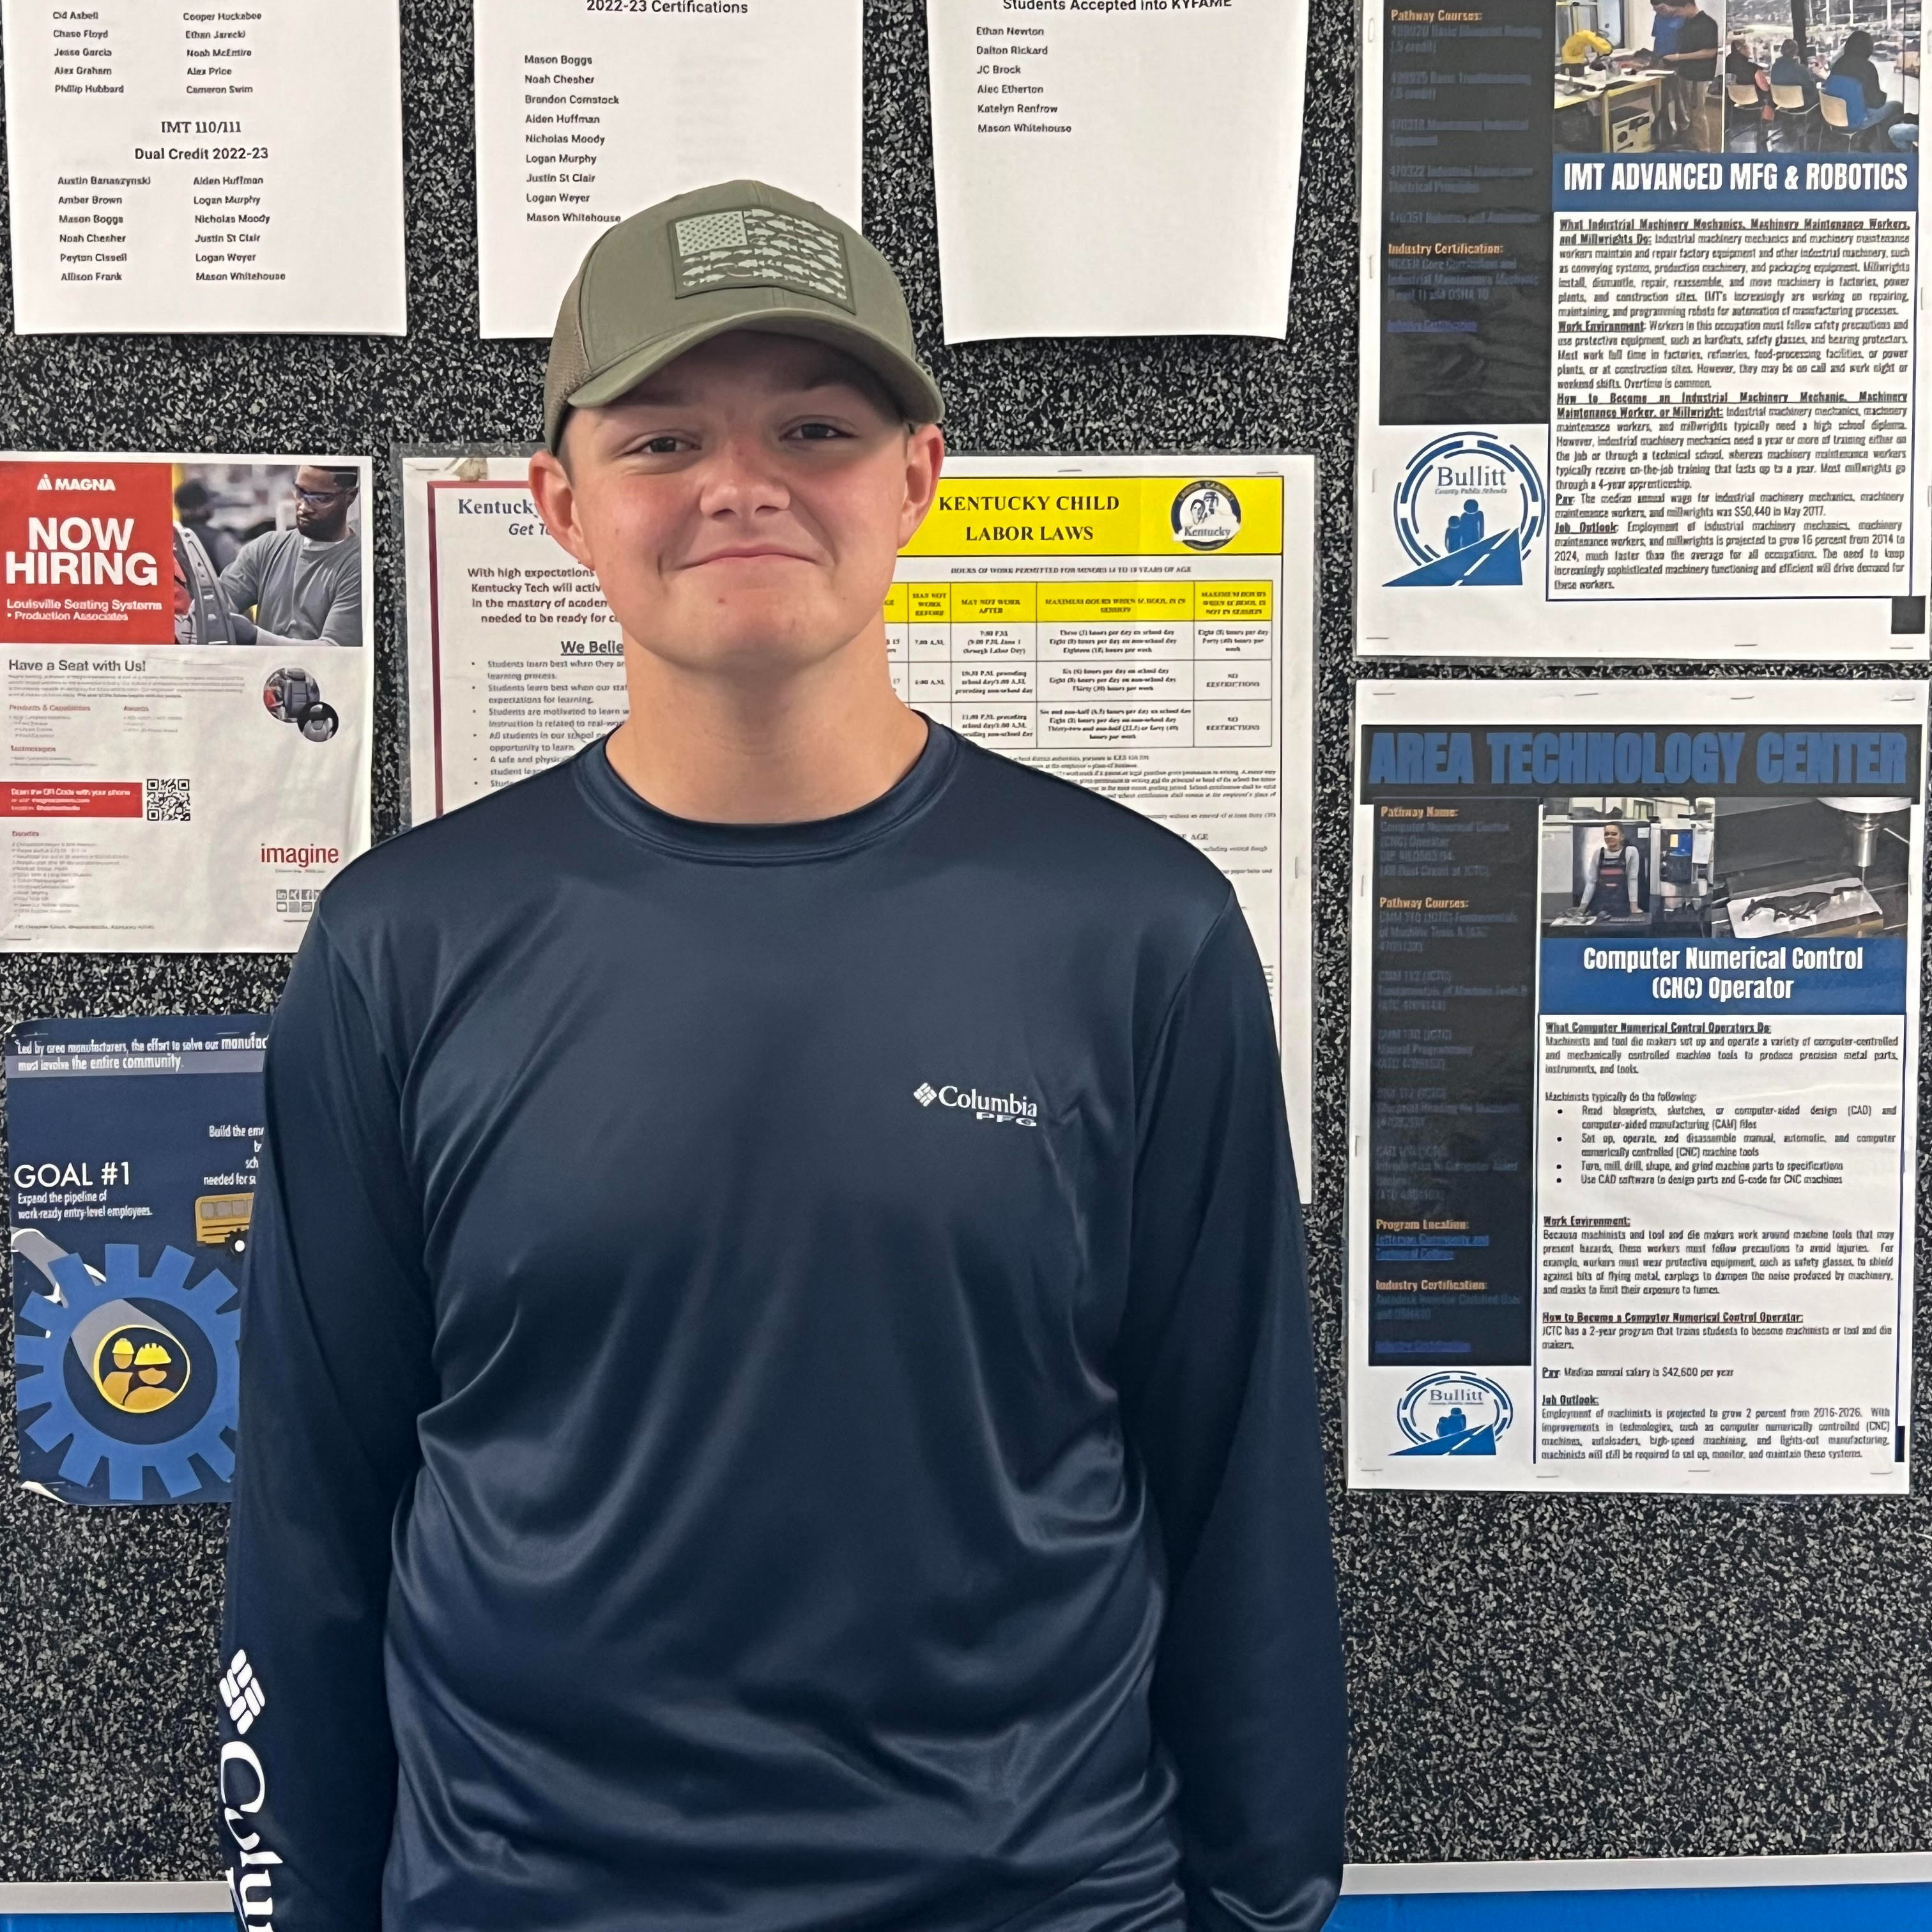 Noah McEntire- Industrial Maintenance Student of the Month